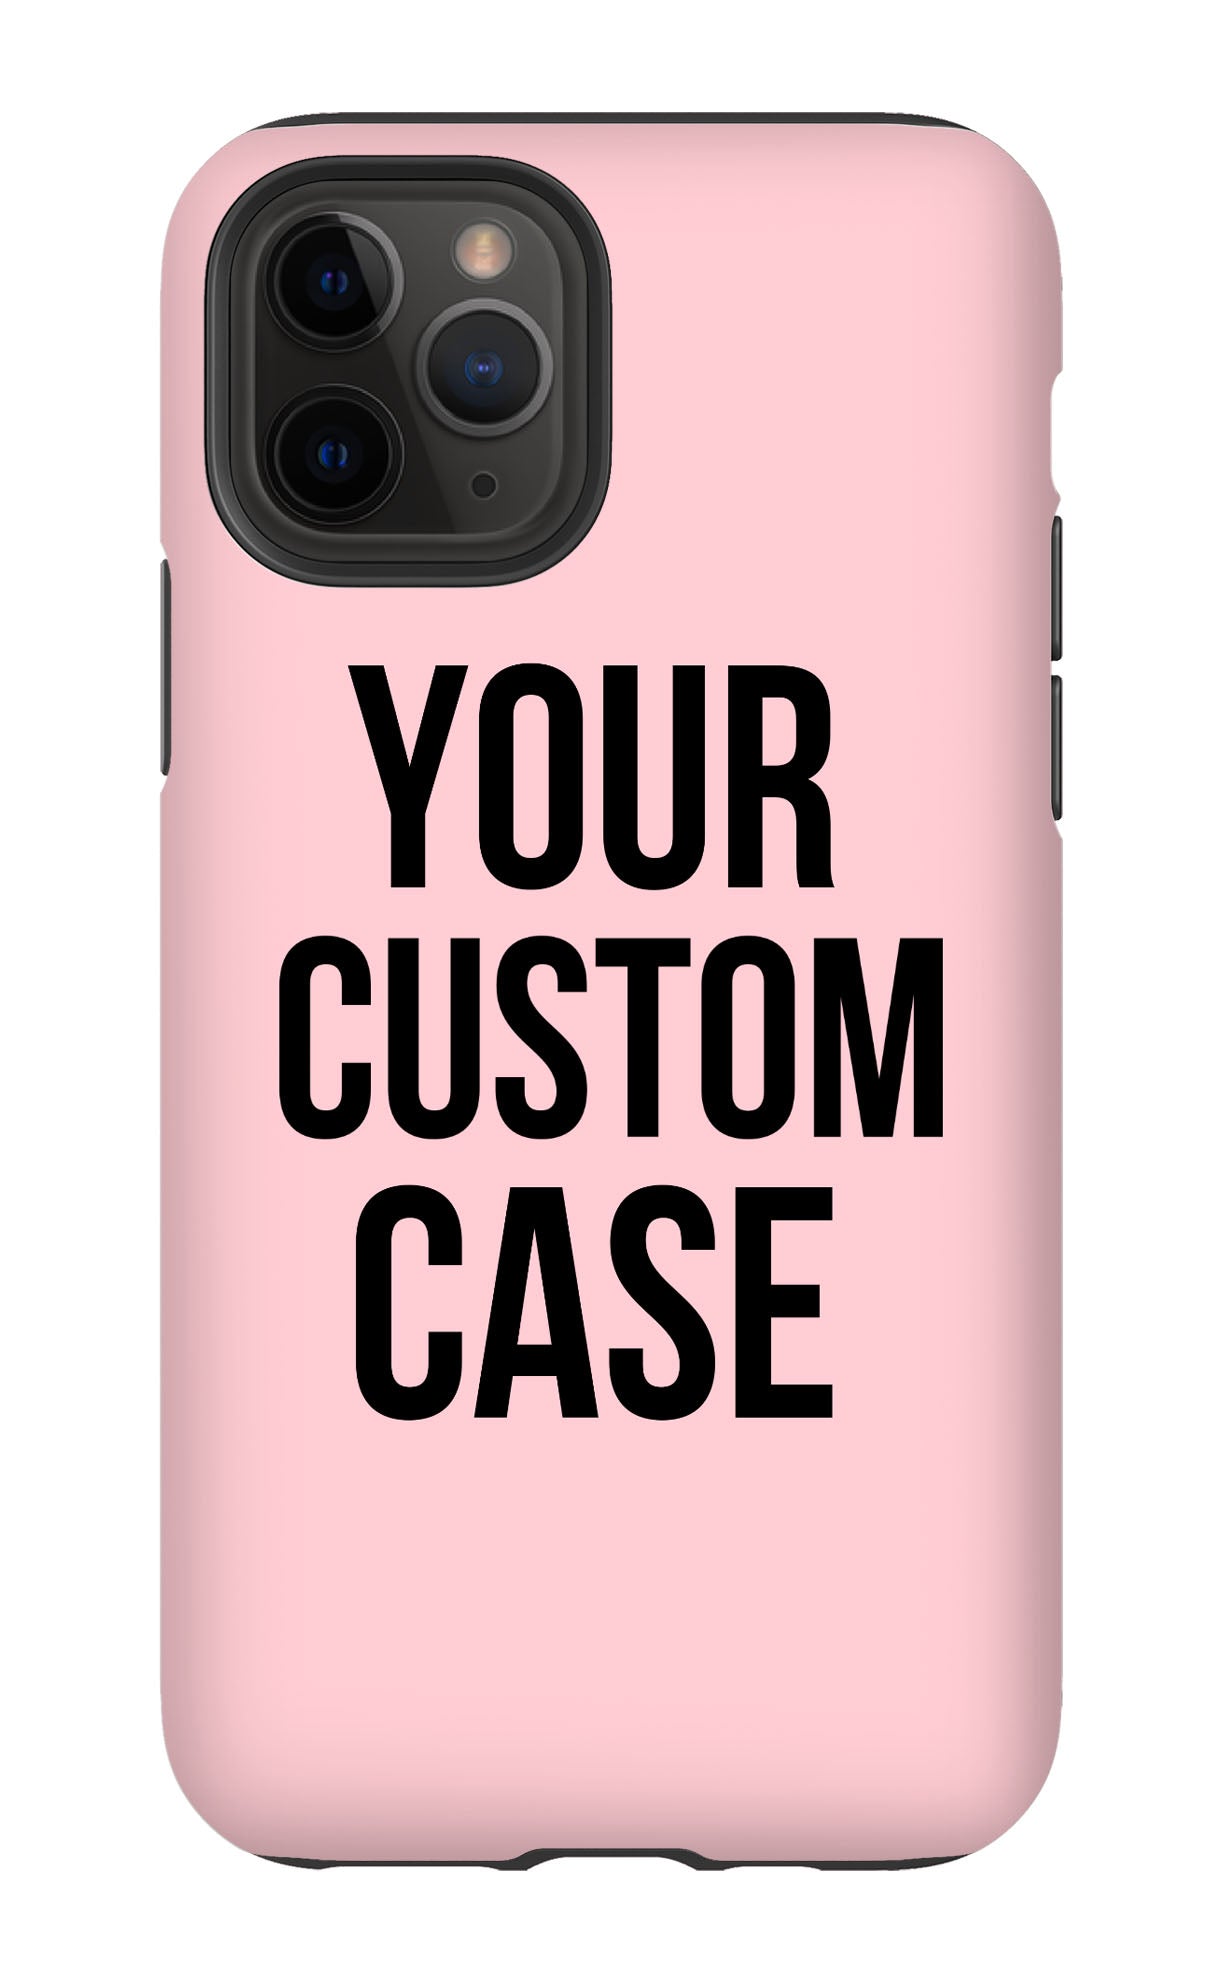 Custom iPhone 11 Pro Extra Protective Bumper Case - Your Custom Design in Cart will be Shipped - Pixly Case